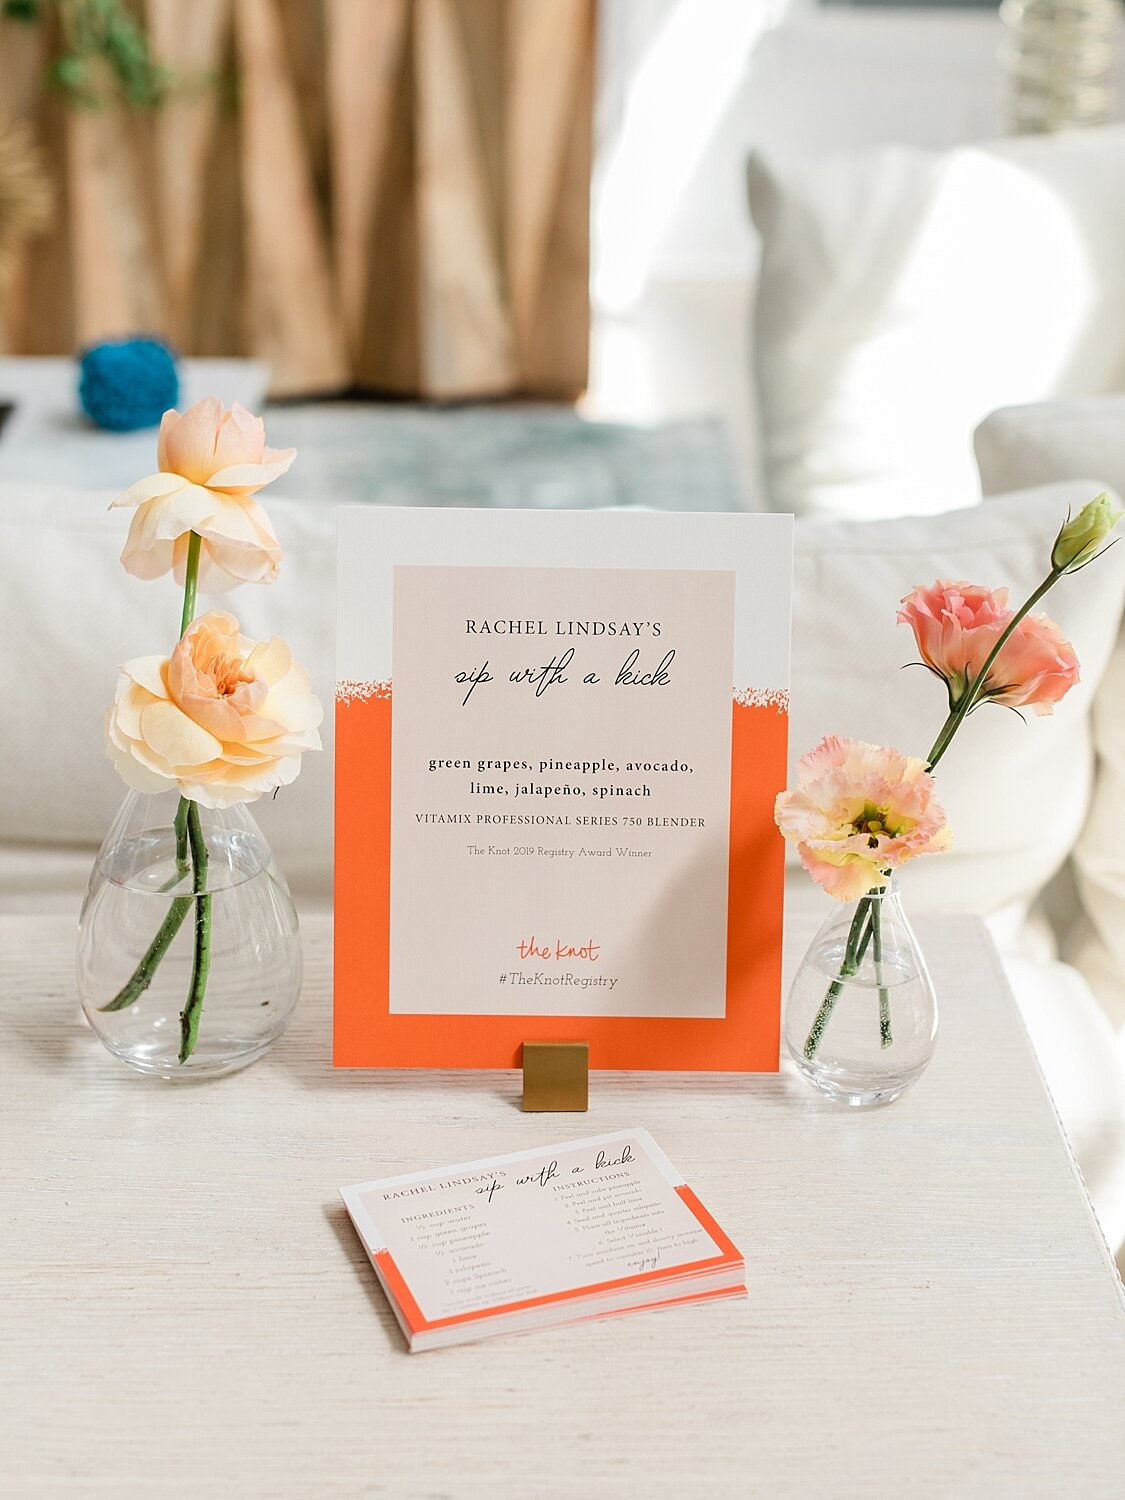 coral details at The Knot event with Rachel Lindsay